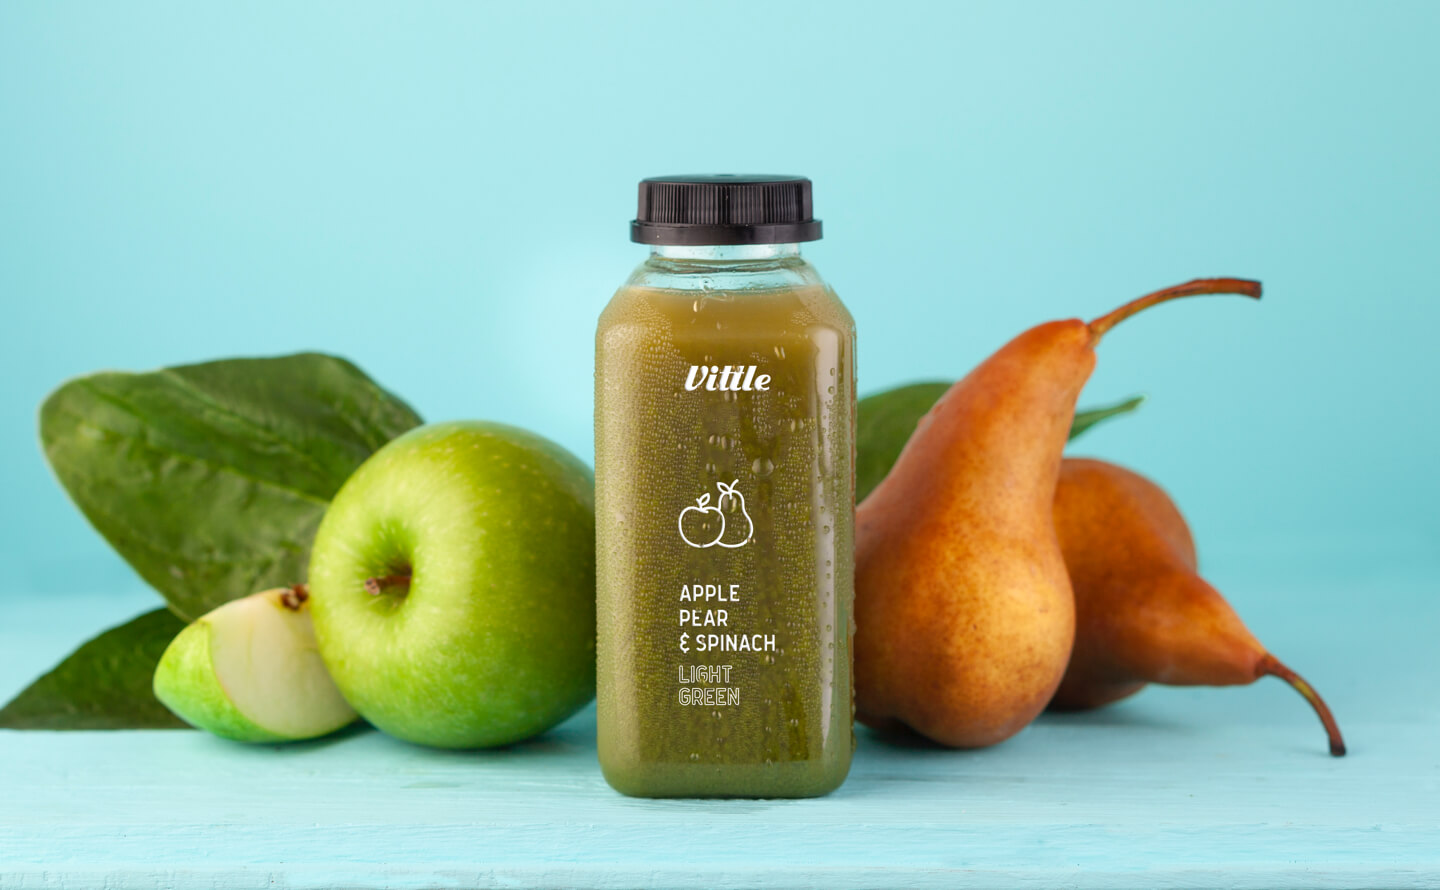 Cold-pressed juices starting at $6